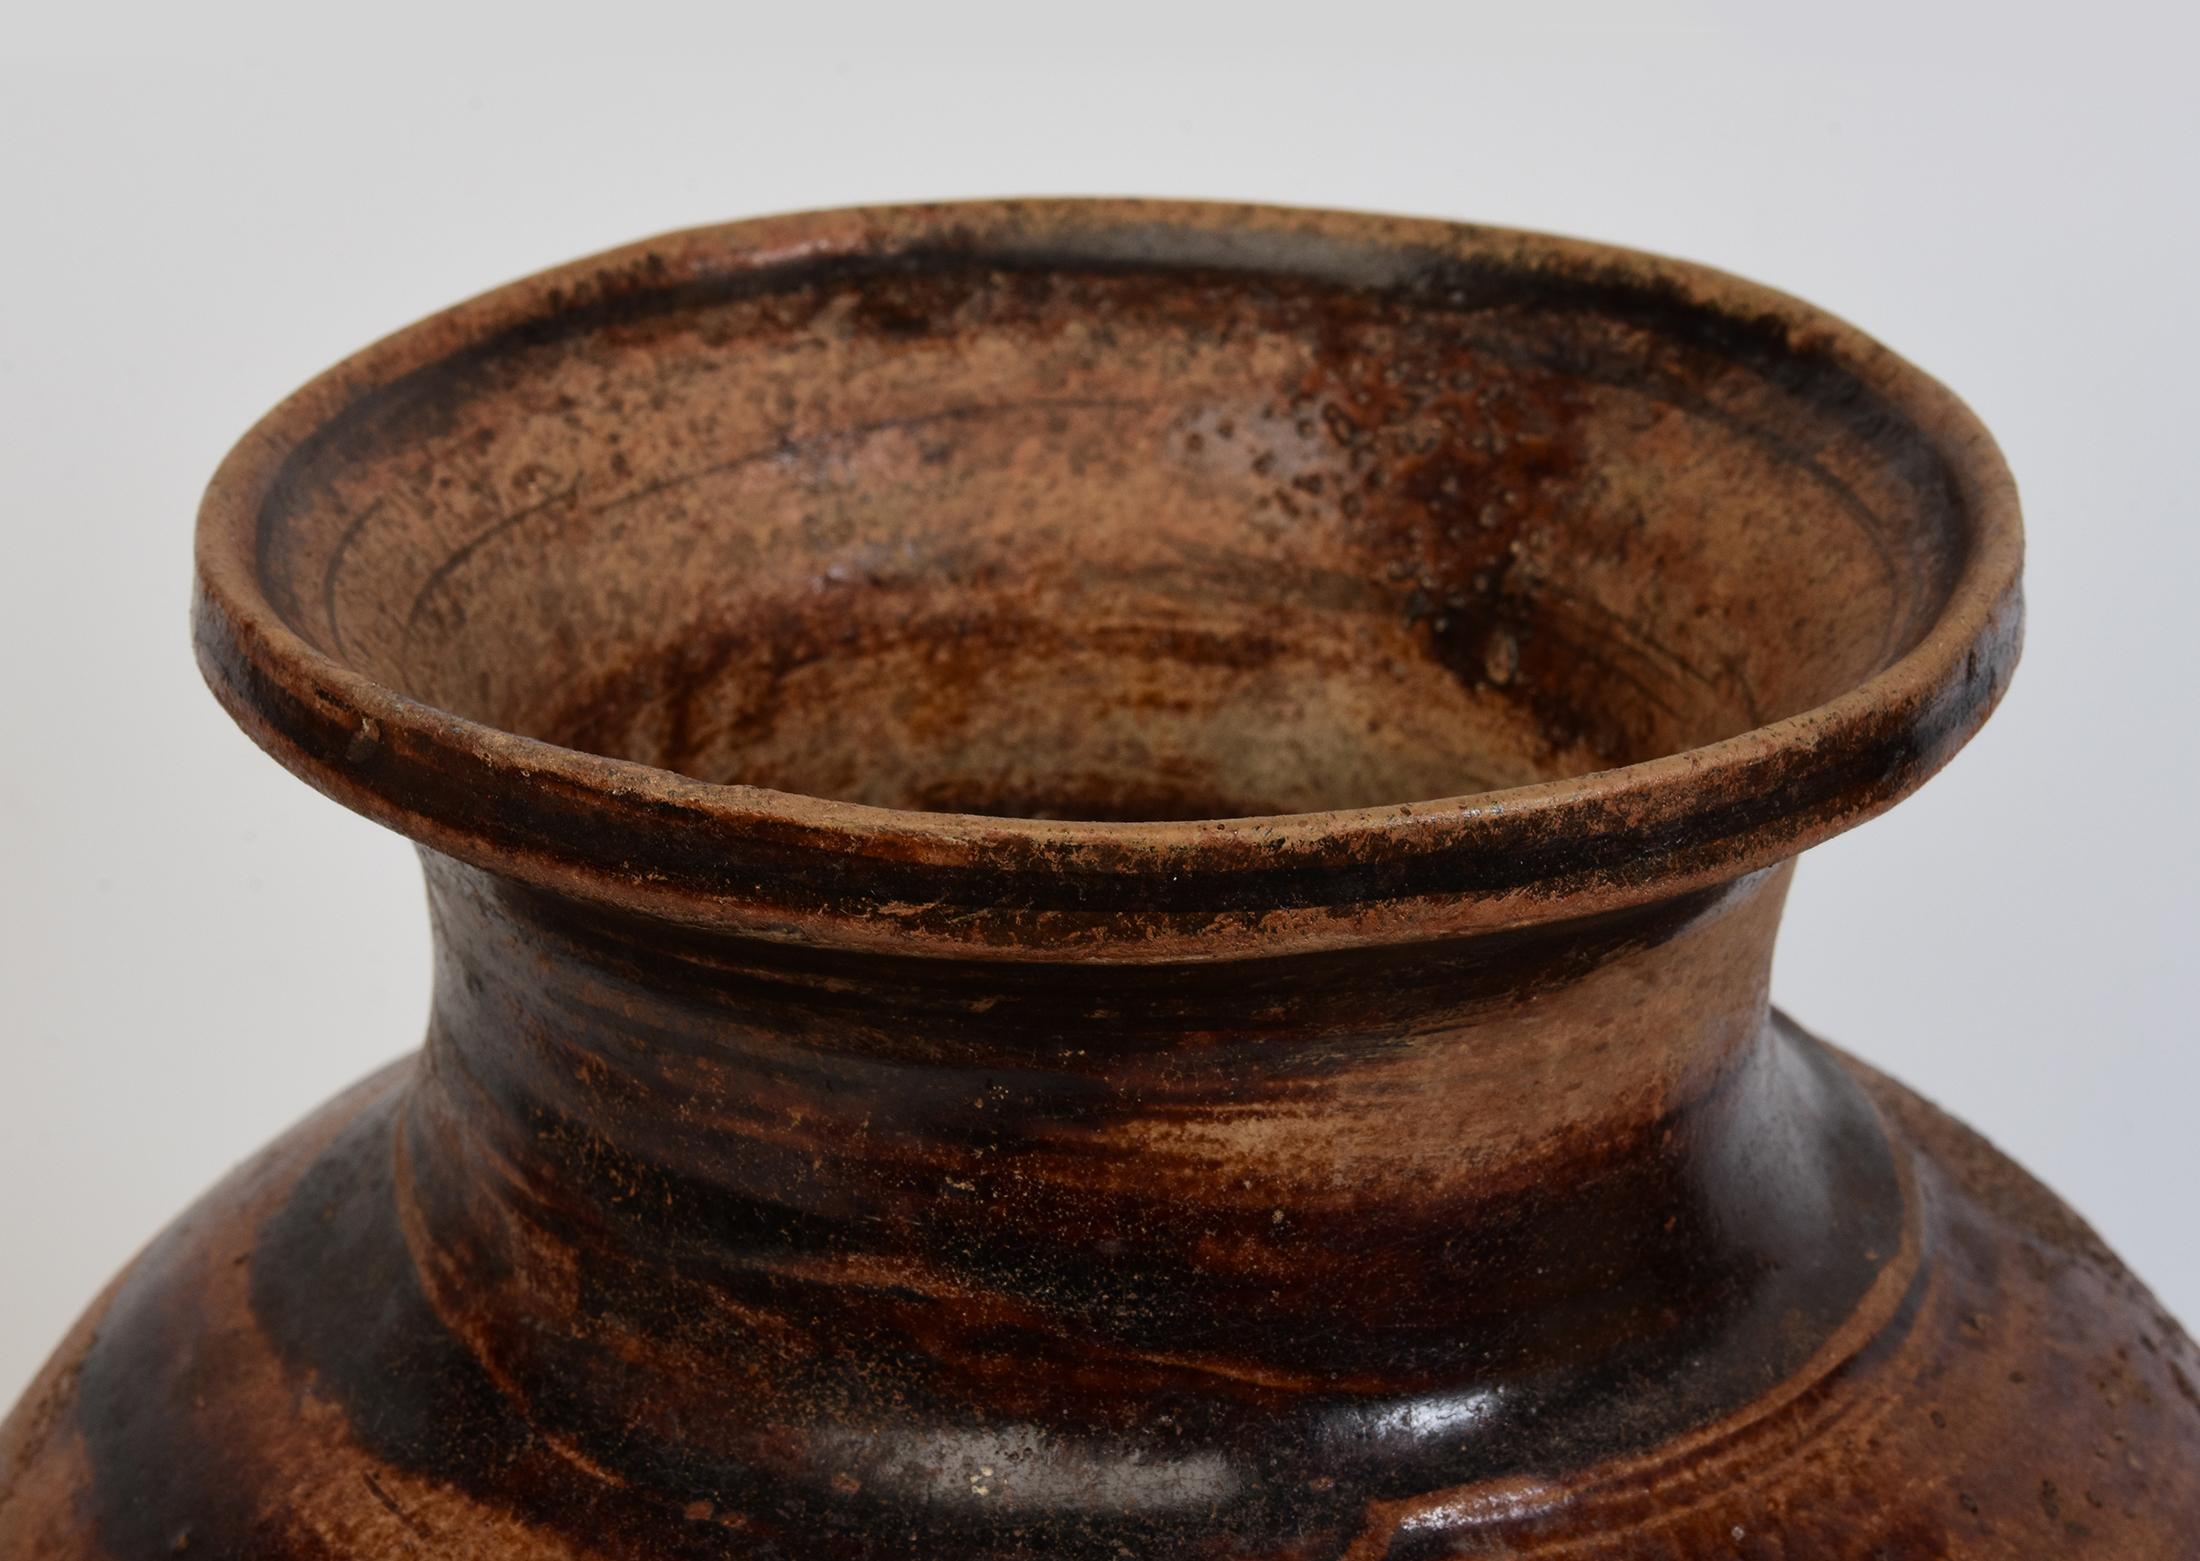 Antique Thai Sankampaeng pottery jar with brown glazed.
Sankampaeng is a Northern Thai ceramic which kilns were found in Chiangmai province.

Age: Thailand, Sankampaeng Period, 15th Century
Size: Height 34.8 C.M. / Width 22.7 C.M.
Condition: Nice